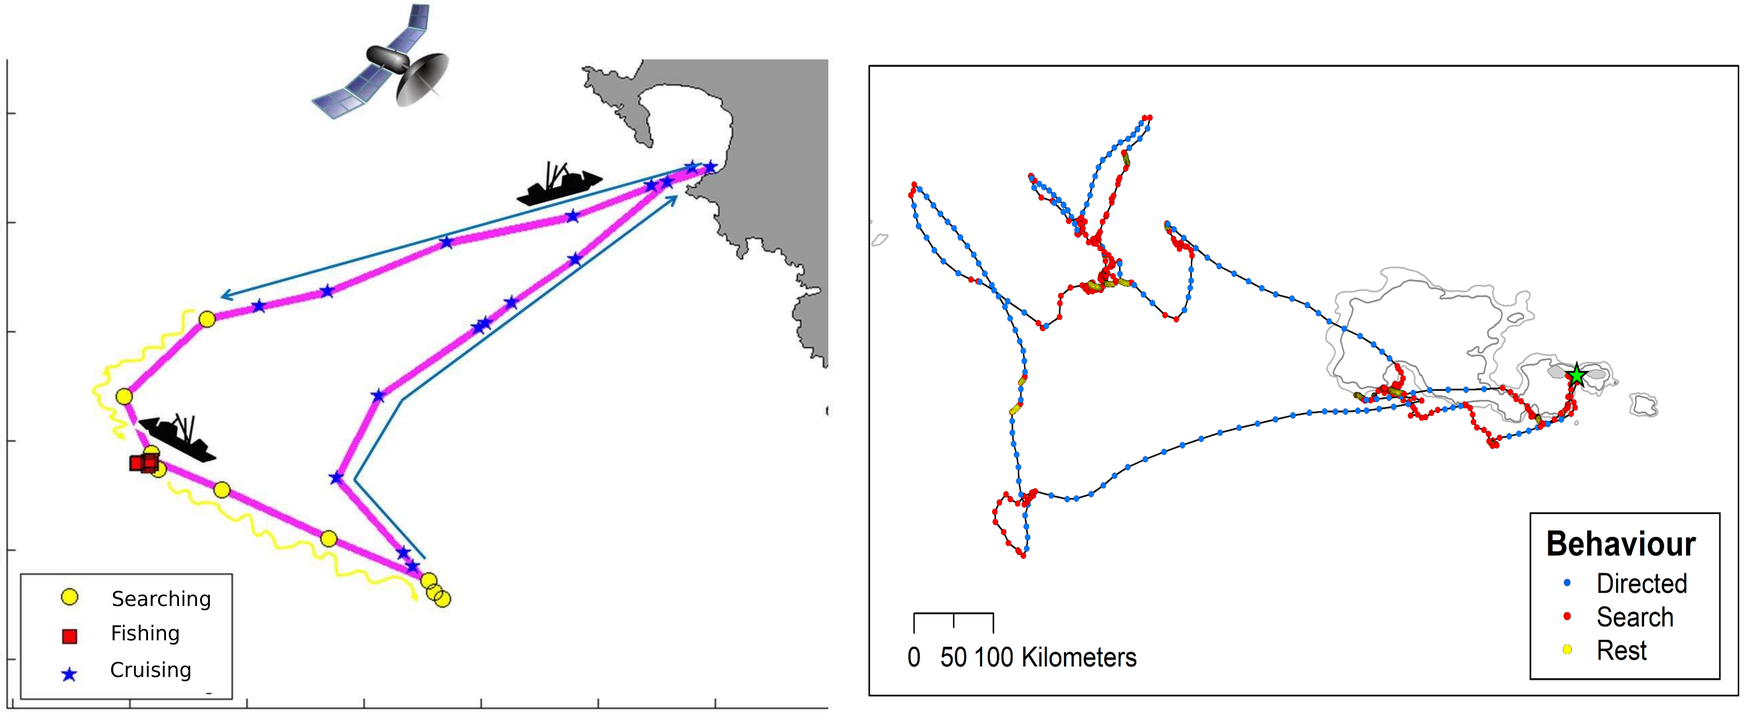 On the left panel, a track of a fishing vessel. The shapes and colors of the geolocated points correspond to different activities: blue stars for cruising, yellow circles for searching, and red squares for fishing. On the right panel, a track of a wandering albatross. The colors of the geolocated points correspond to different activities: blue for directed behavior, red for searching and yellow for resting.